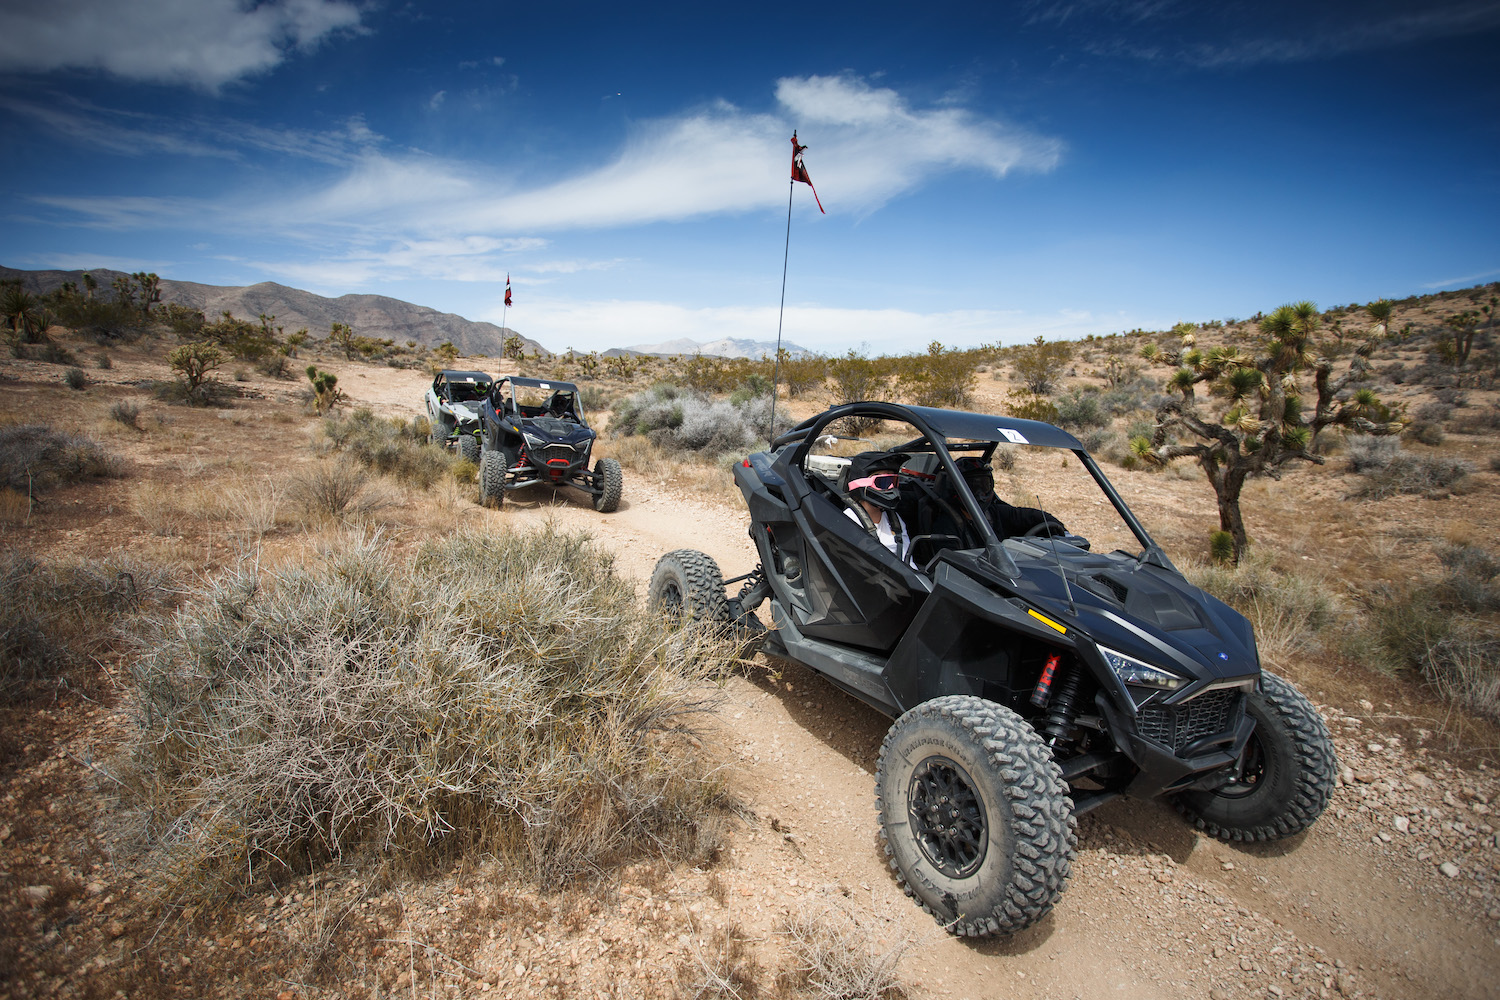 Polaris Polaris RZR Pro Rs driving on a dirt trail in the desert with bushes in the background.